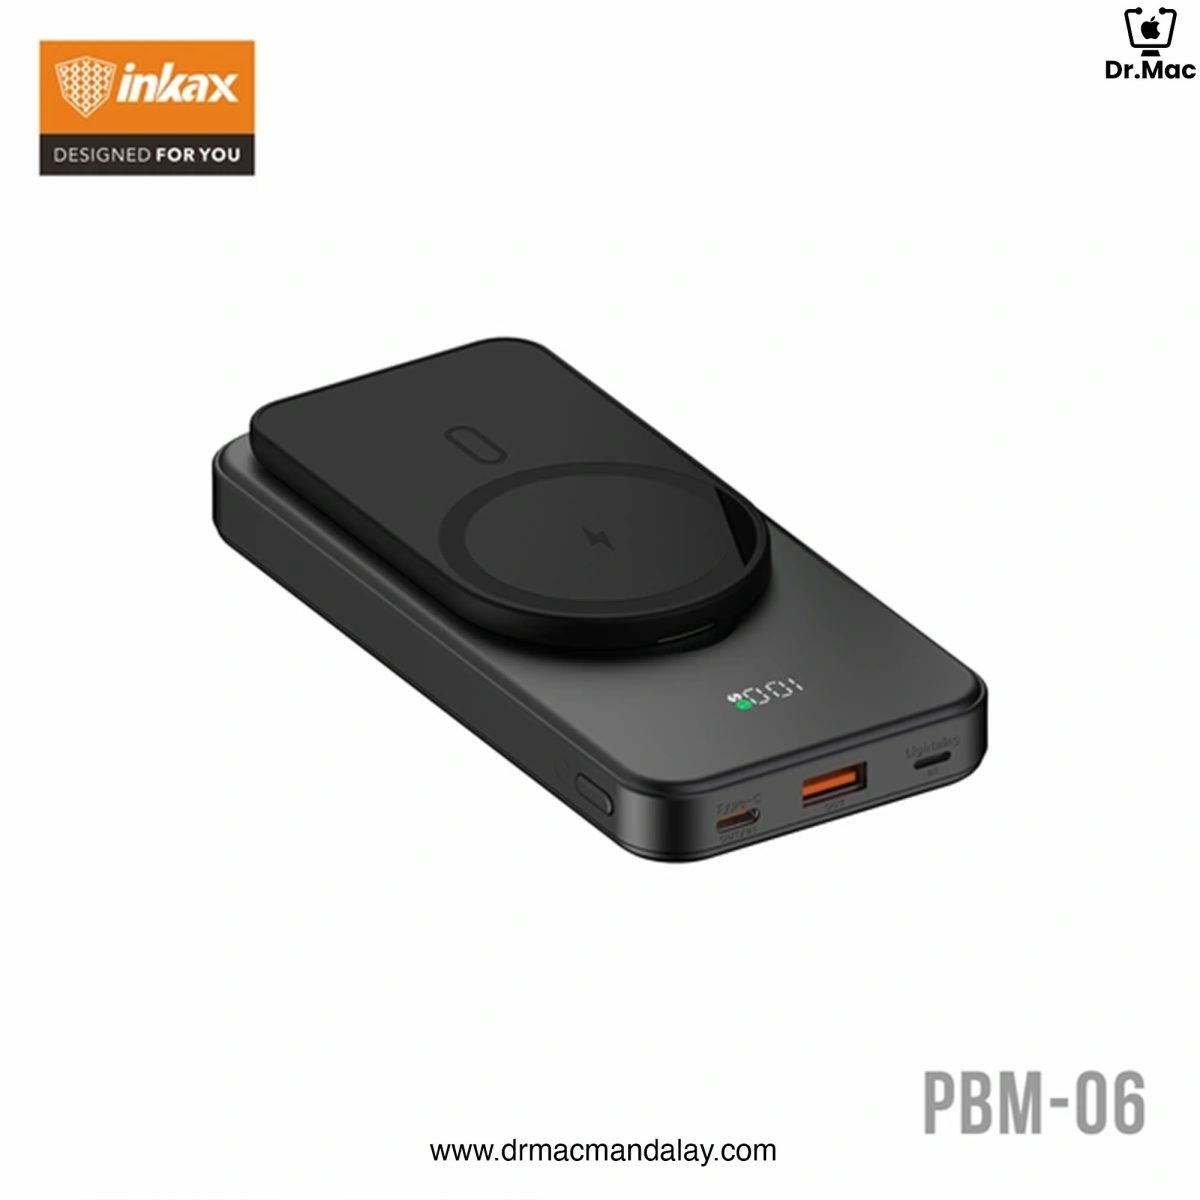 inkax magnetic wireless charging power bank